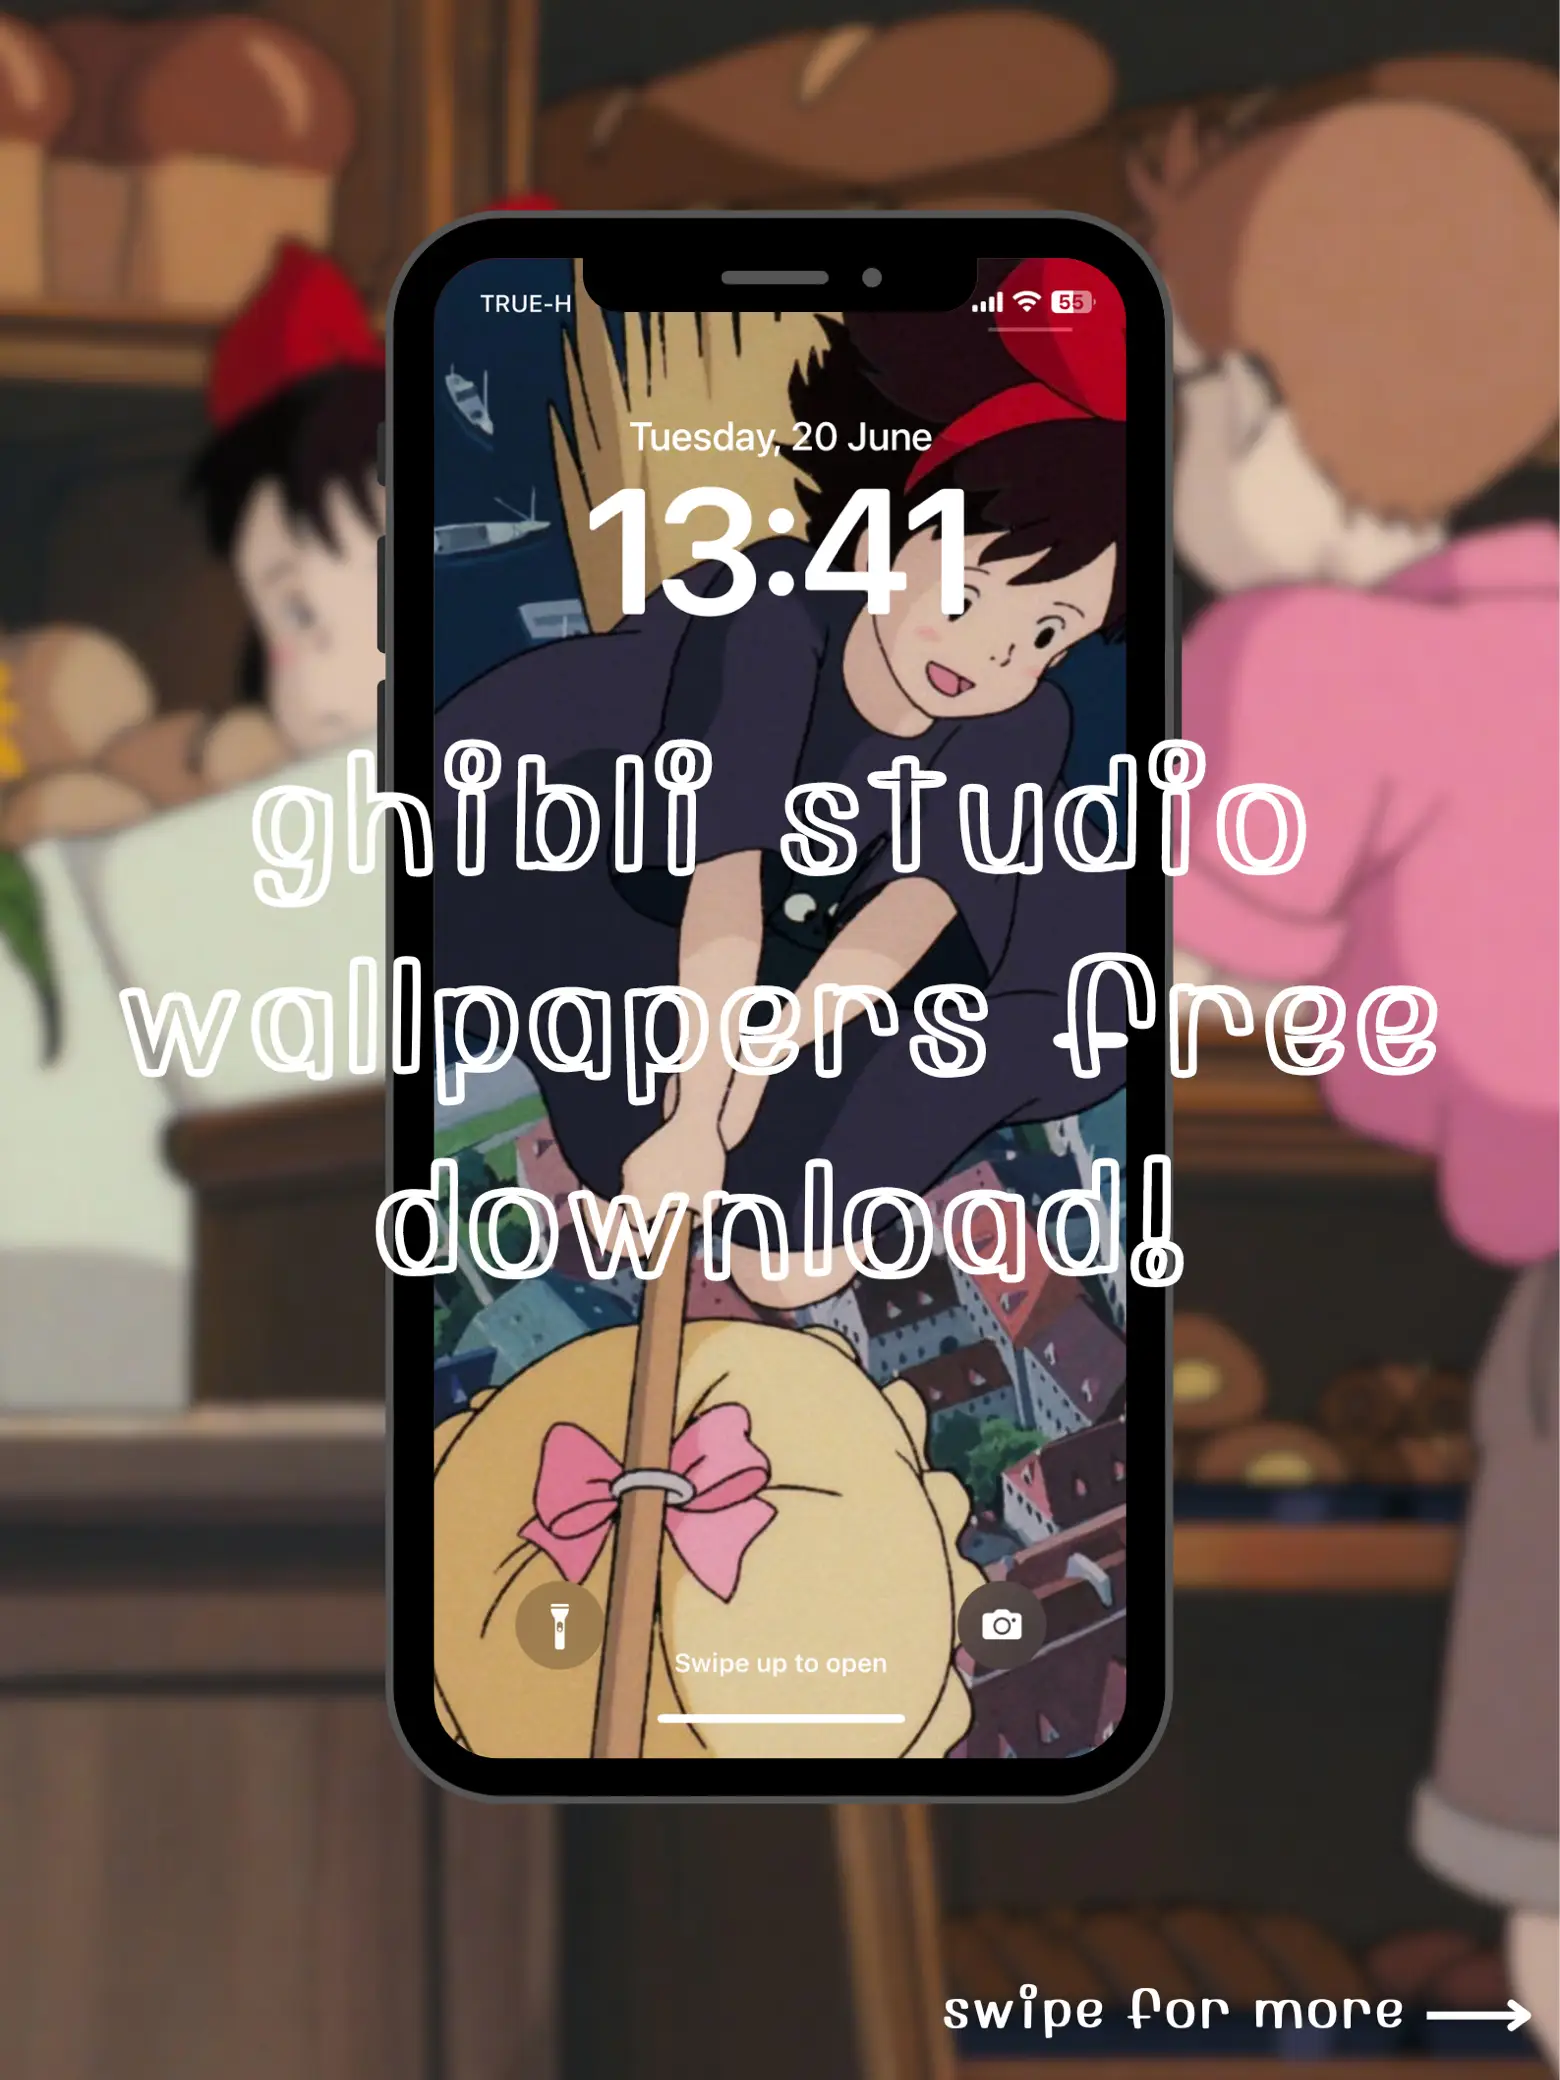 The devotee ghibli studio know yet? ghibli give away free wallpapers!, Gallery posted by mizuki